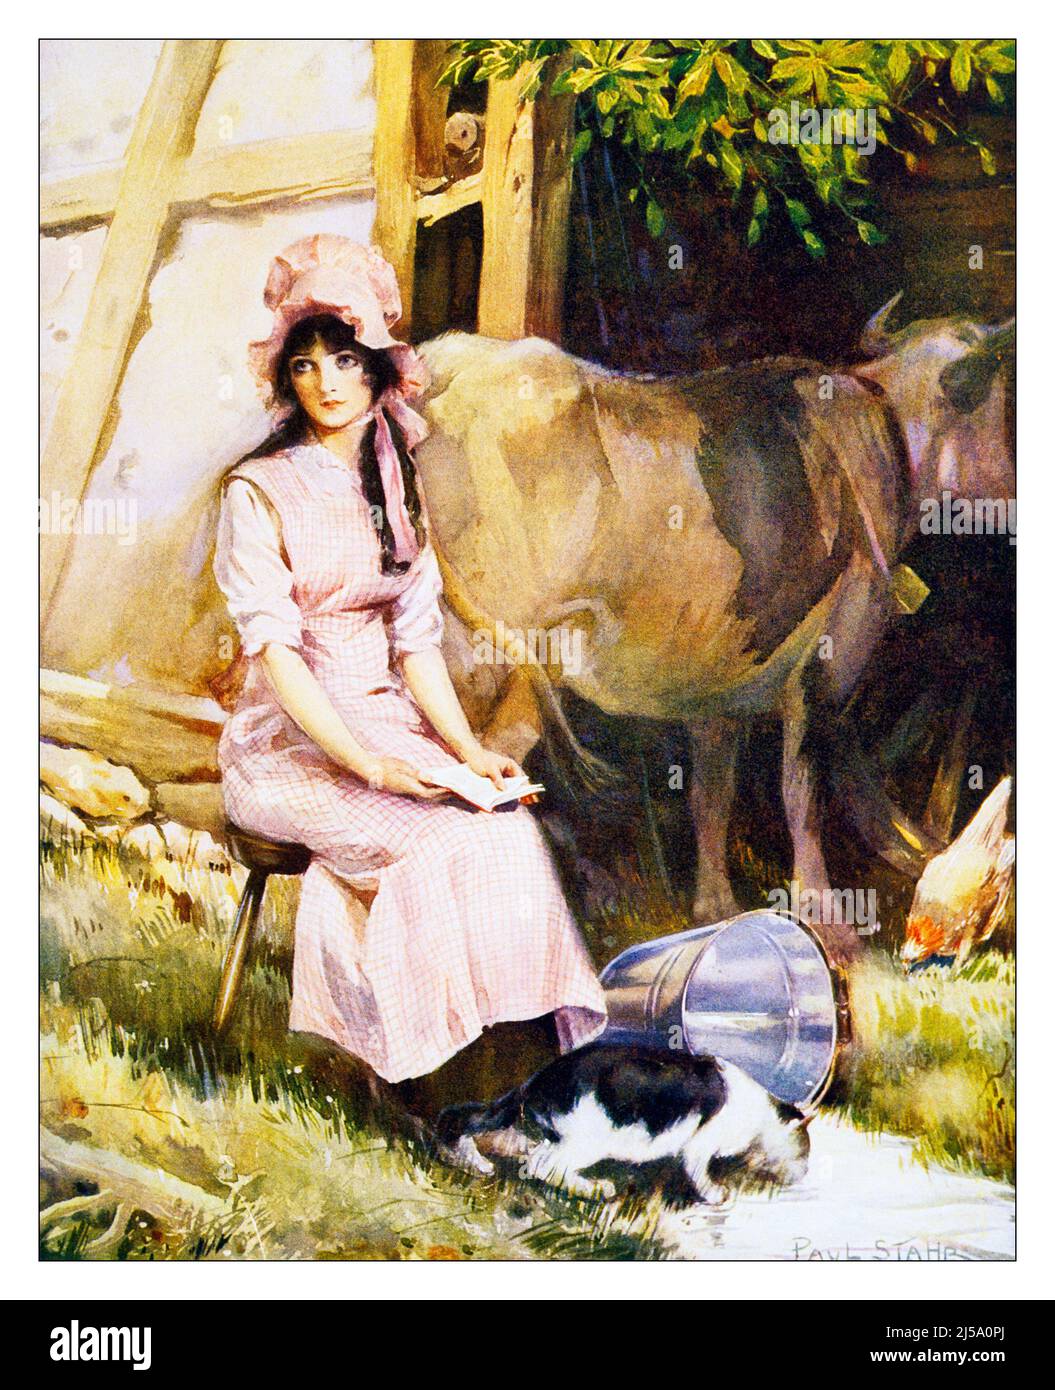 1910s WOMAN MILKMAID READING LETTER FROM ABSENT BEAU COW KICKED OVER PAIL CAT DRINKING THE SPILLED MILK ART BY PAUL STAHR - kf38905 NAW001 HARS BEAUTY DEPRESSION COLOR EXPRESSION OLD TIME NOSTALGIA OLD FASHION 1 FACIAL STYLE COMMUNICATION YOUNG ADULT DRINKS INFORMATION WORRY LIFESTYLE COVER FEMALES MOODY RURAL HOME LIFE DAIRY COPY SPACE FULL-LENGTH LADIES COW PERSONS BOYFRIEND FARMING SPILLED PAUL EXPRESSIONS TROUBLED BONNET AGRICULTURE CONCERNED SADNESS DREAMS TURN OF THE 20TH CENTURY PAIL FARMERS MOOD OCCUPATIONS RIO DAIRY COW 19TH CENTURY CONCEPTUAL GLUM GRANDE STYLISH KICKED LOVELORN Stock Photo